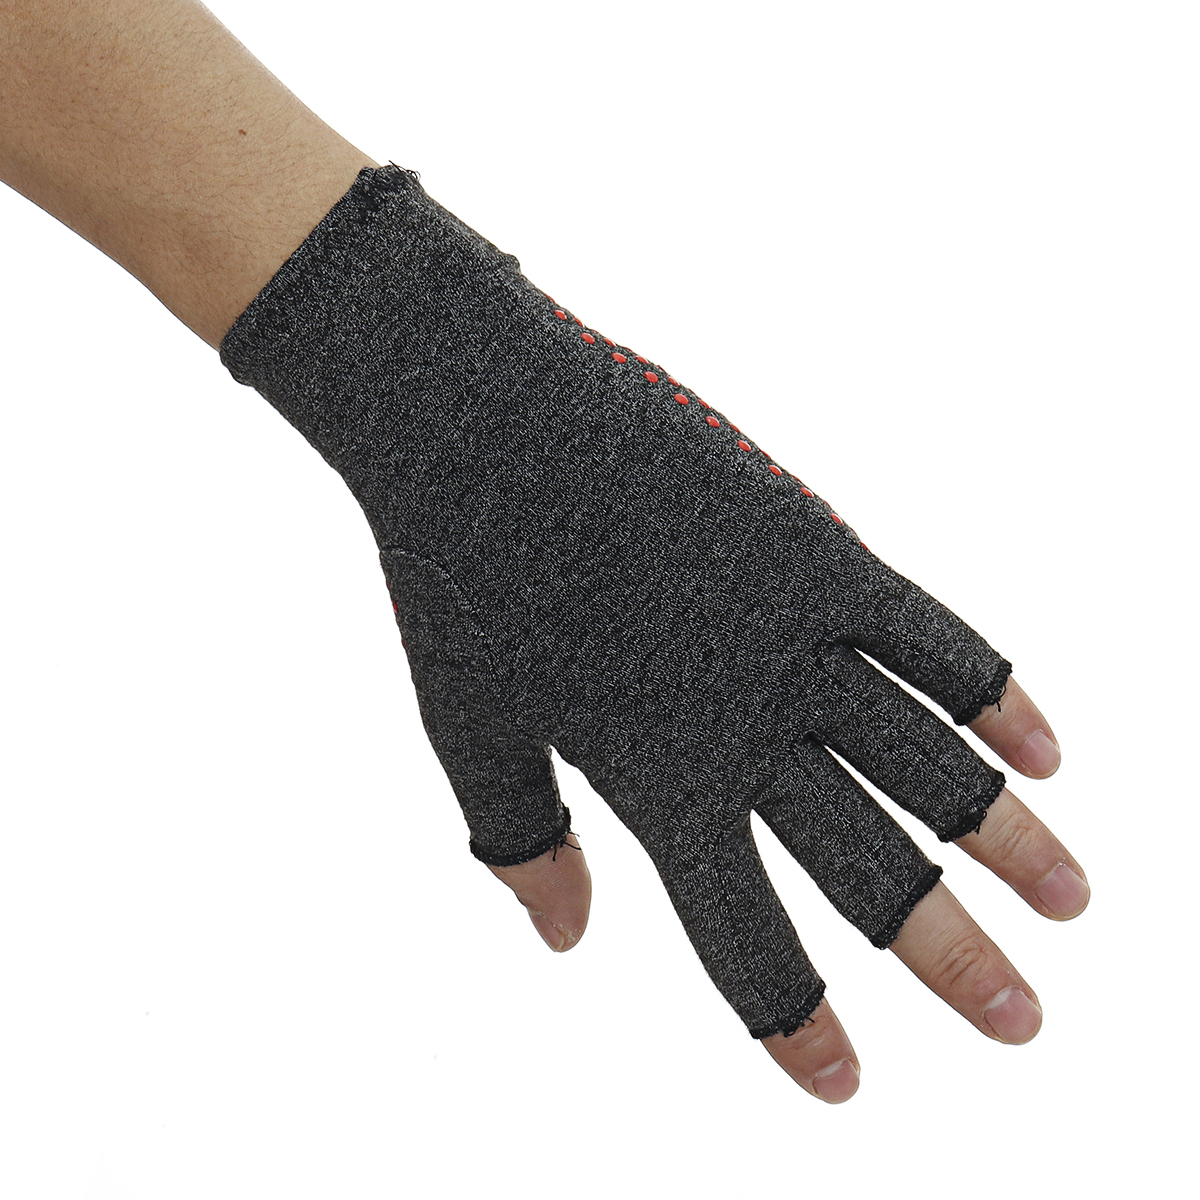 1-Pair-Compression-Arthritis-Gloves-Arthritic-Joint-Pain-Relief-Hand-Gloves-Therapy-Open-Fingers-Com-1777634-4